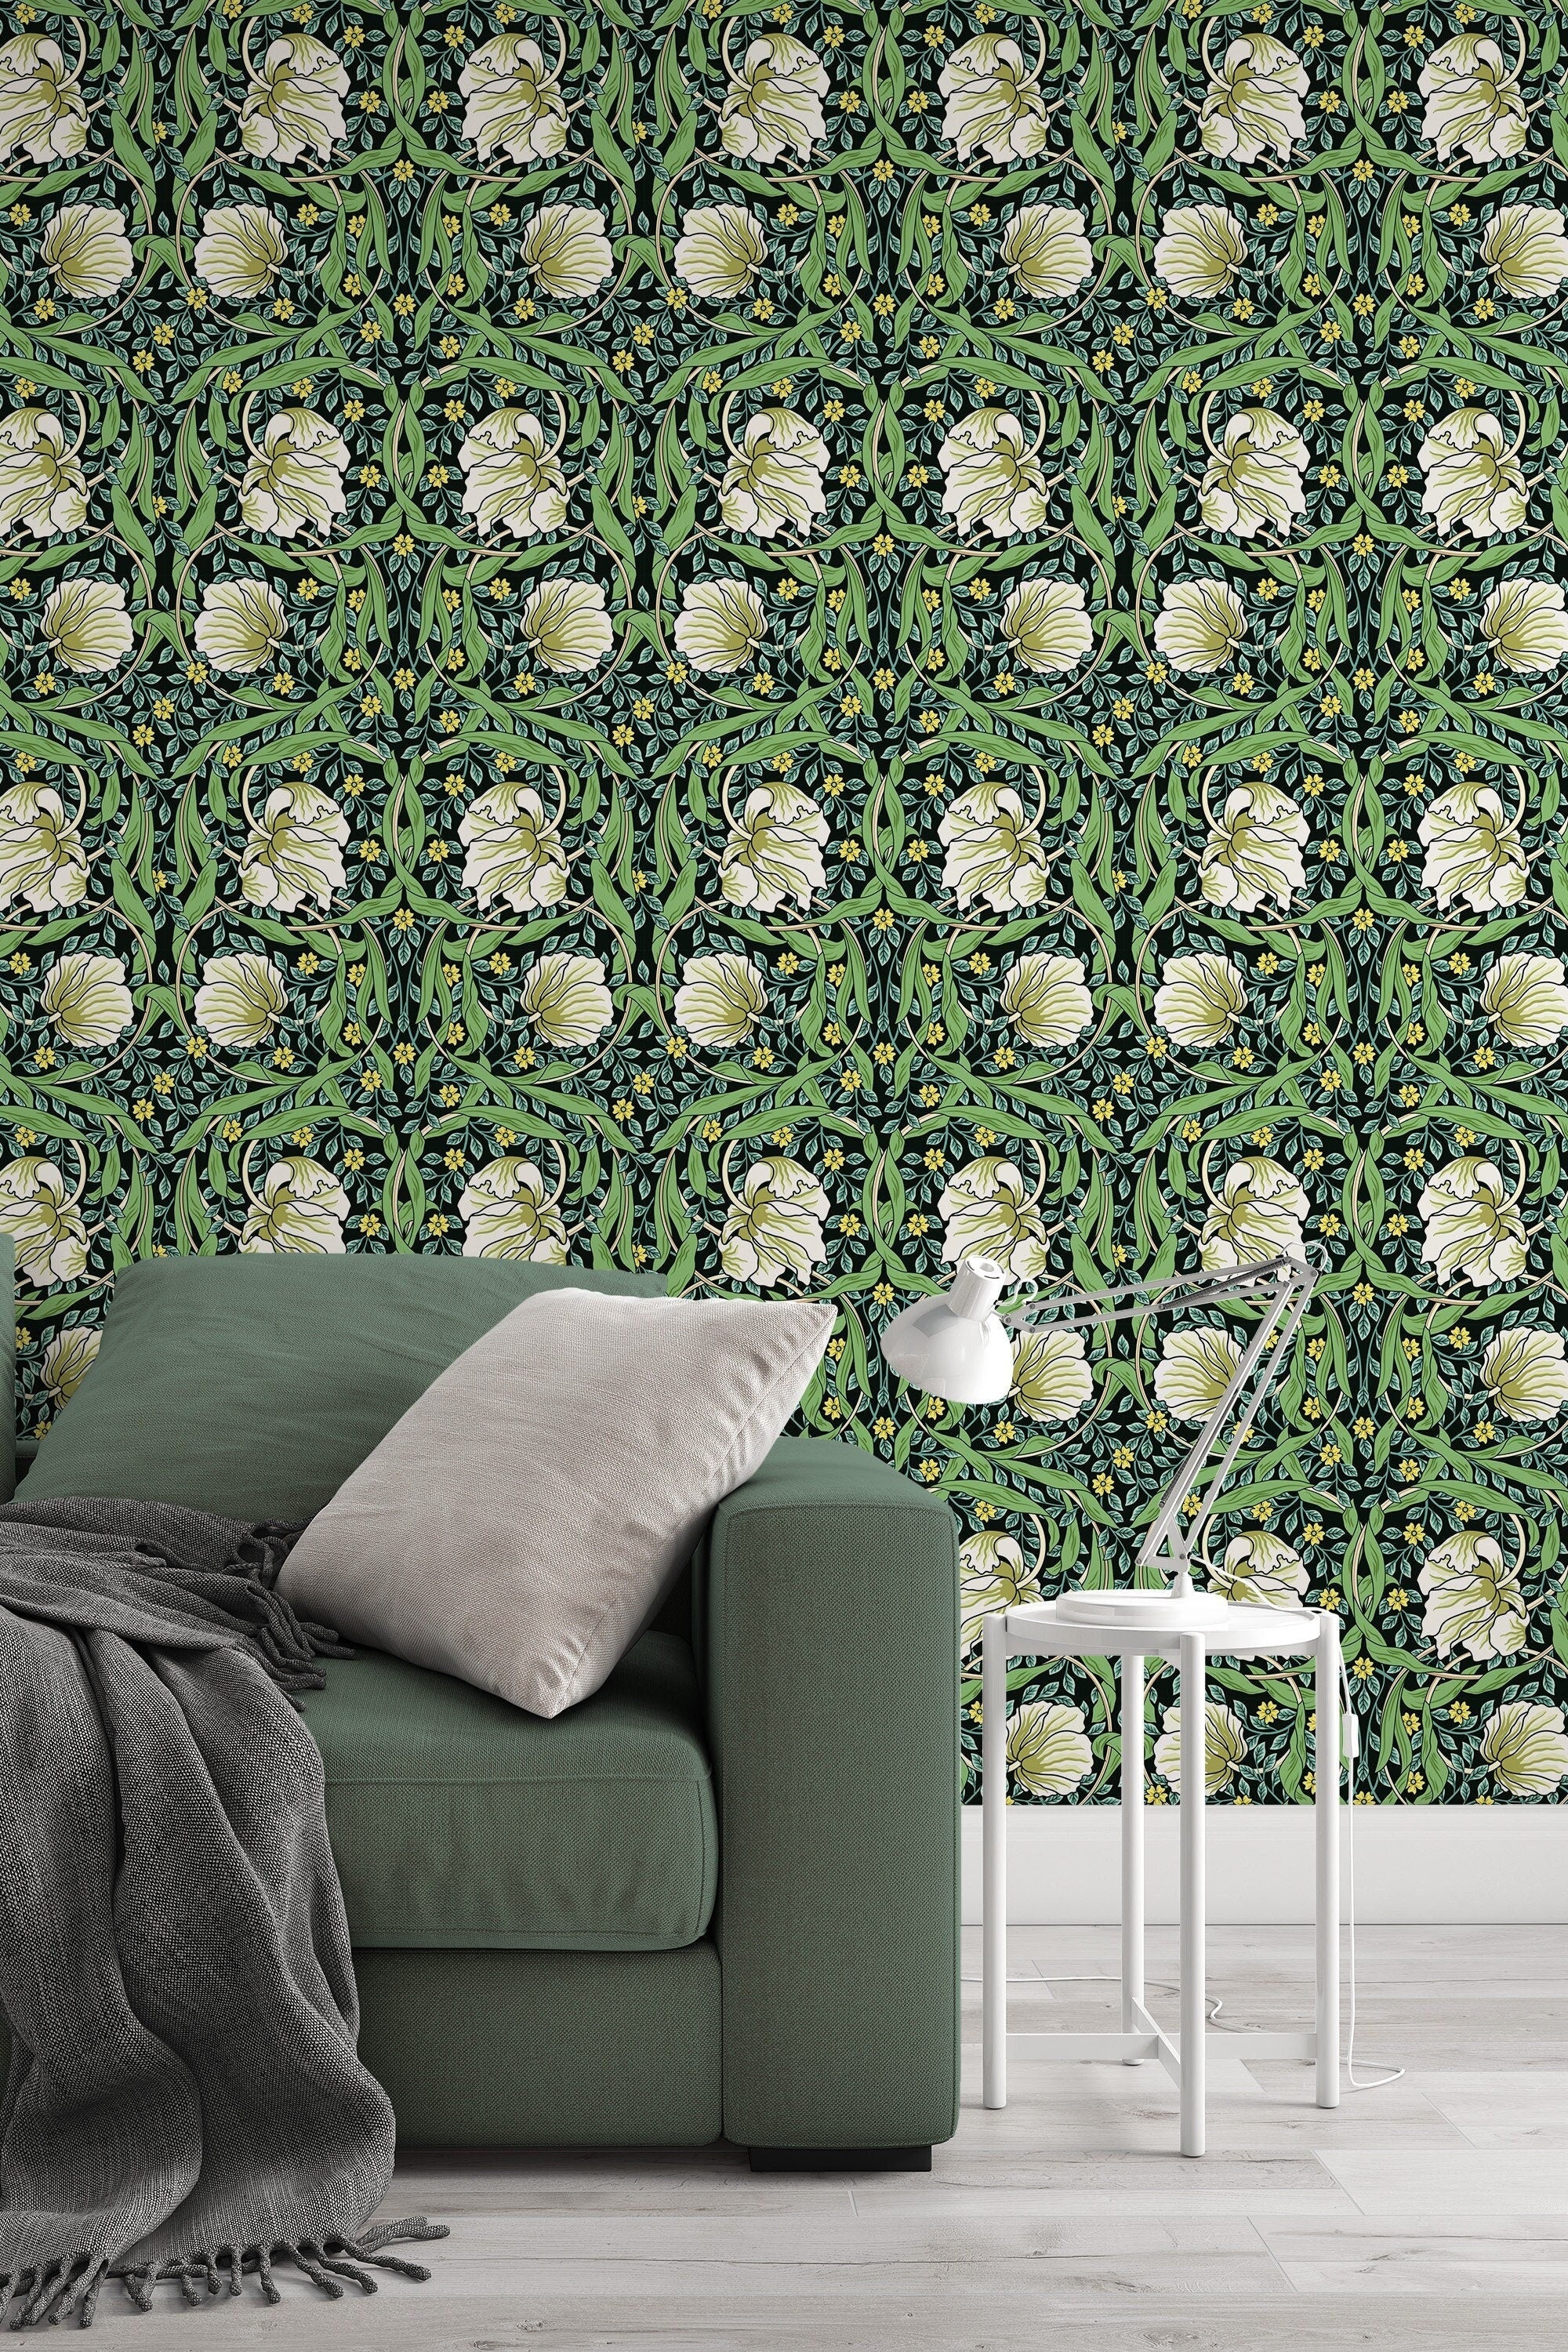 Floral William Morris Wallpaper  Peel and Stick Wallpaper Removable W   ONDECORCOM